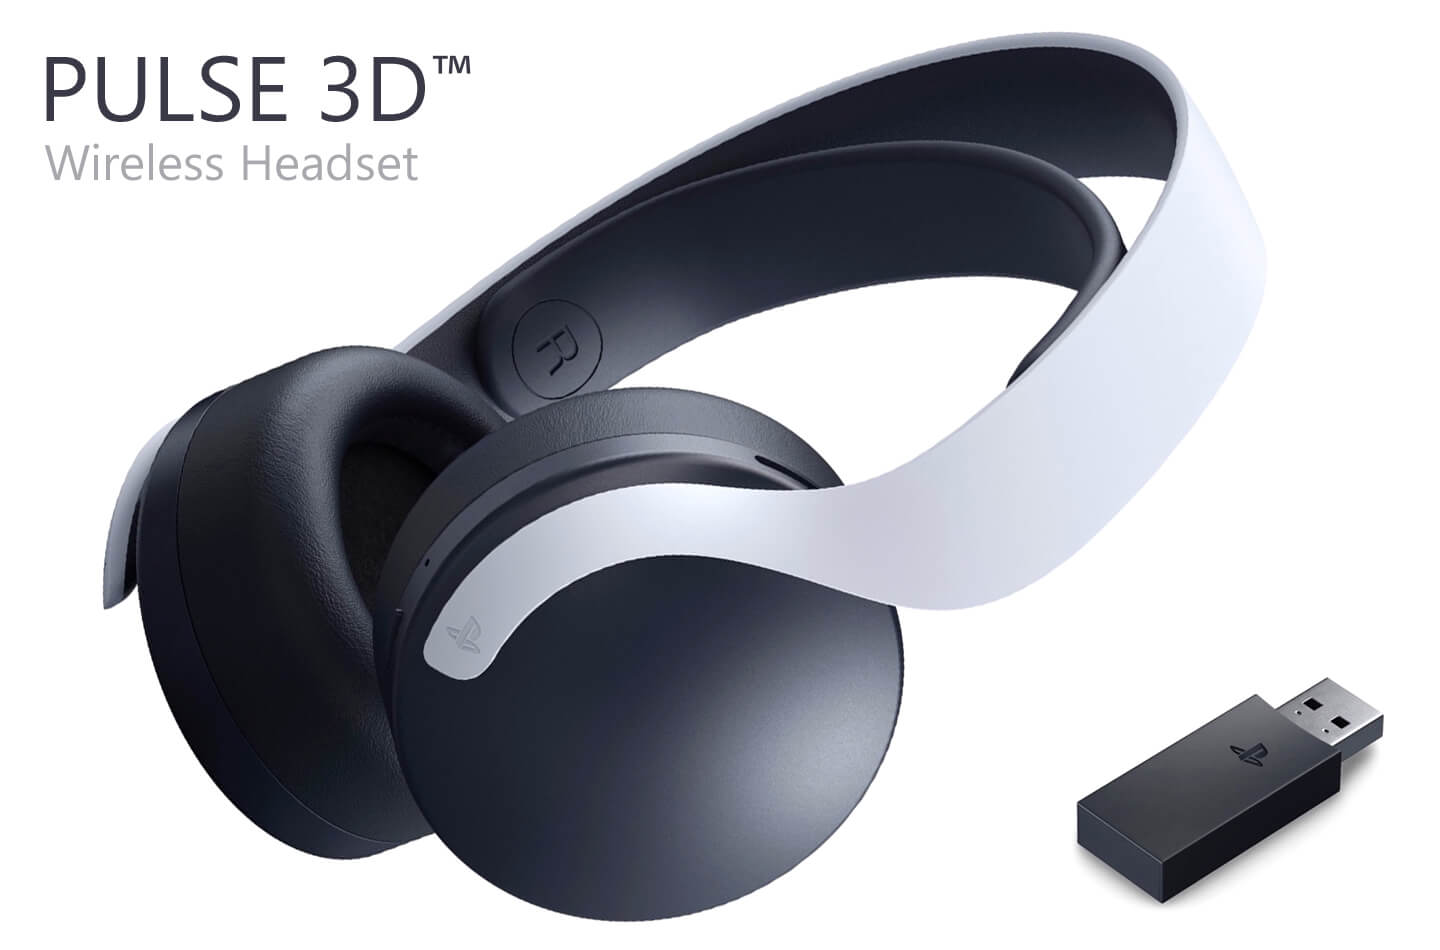 ps5 pulse 3d headset price